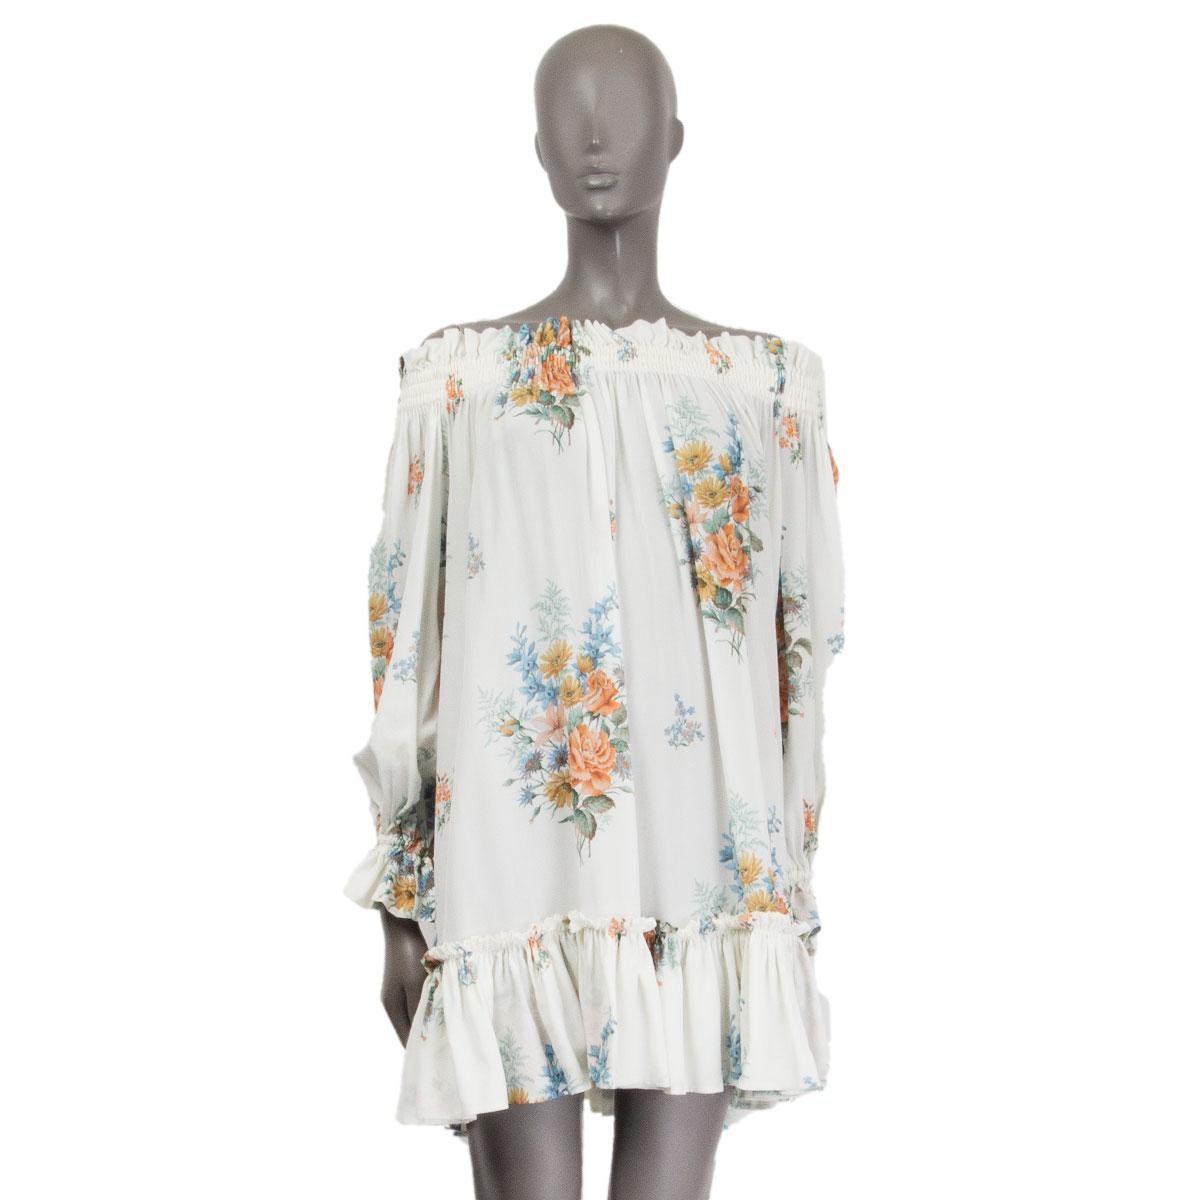 authentic Alexander McQueen carmen-neckline babydoll dress in off-white, yellow, orange, green and light blue floral printed silk (100%) missing tag. Ruched neckline, cuffs and hem-line. Has been worn with two faint yellow stains on the inner side